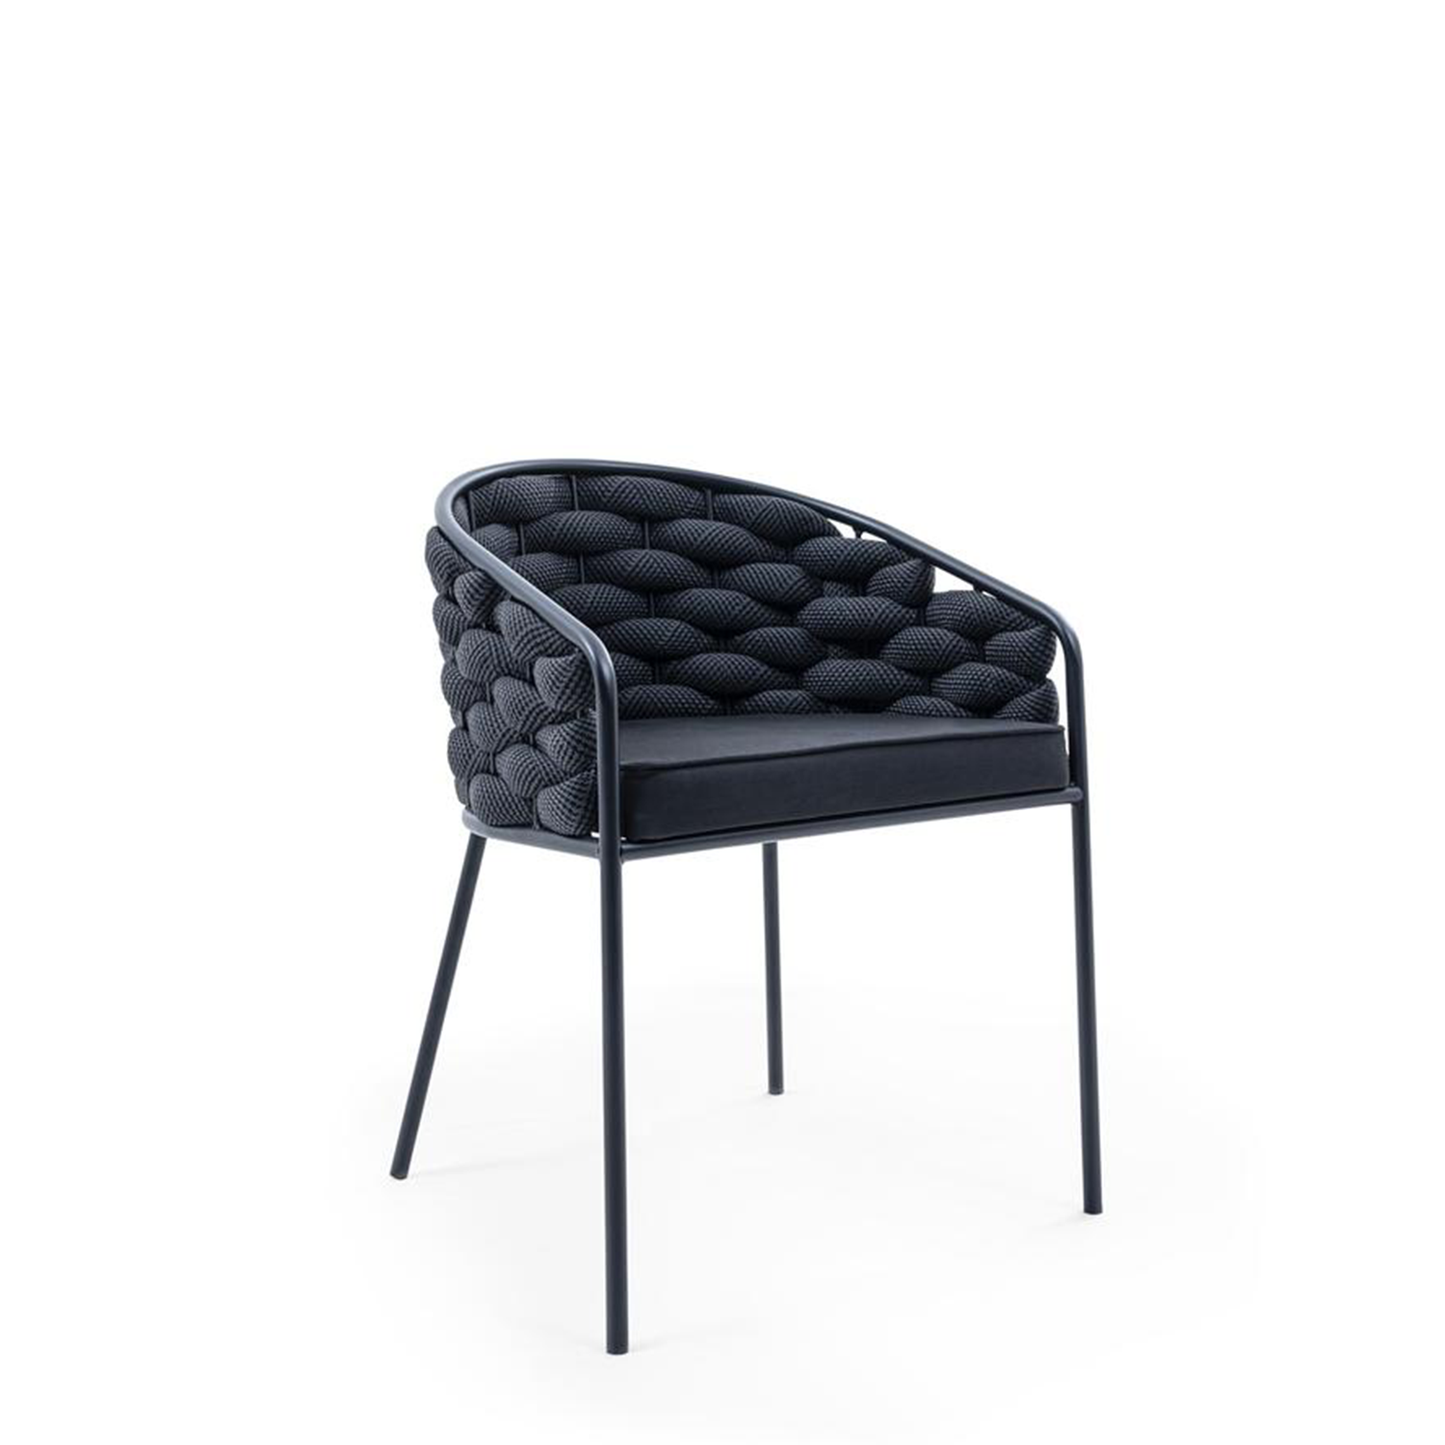 Ovate Chair